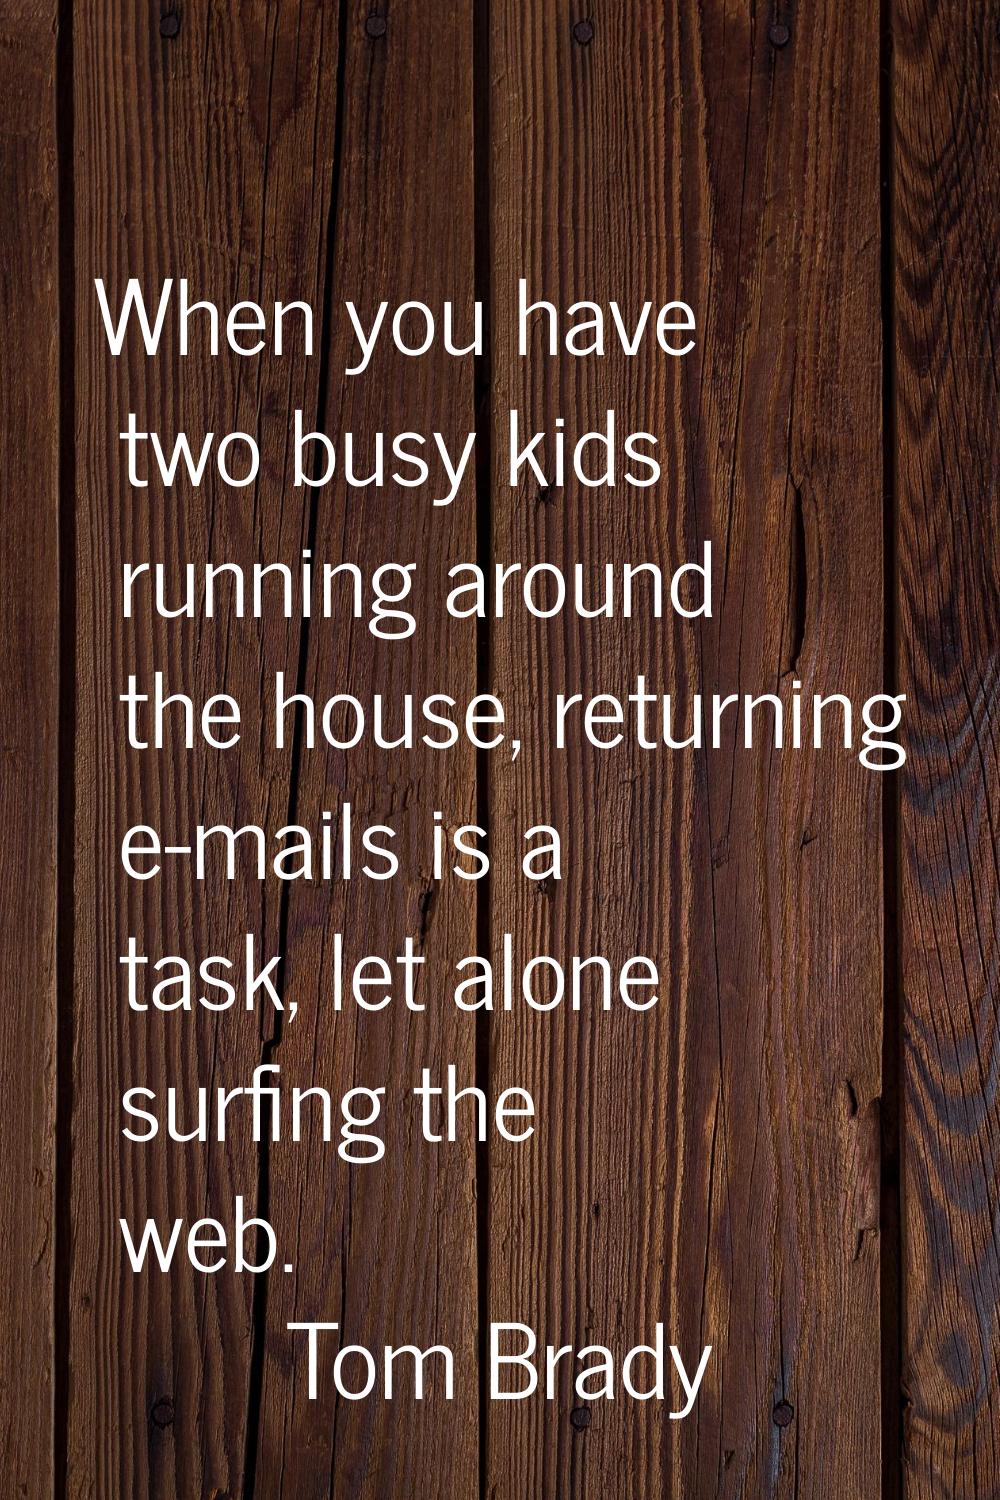 When you have two busy kids running around the house, returning e-mails is a task, let alone surfin